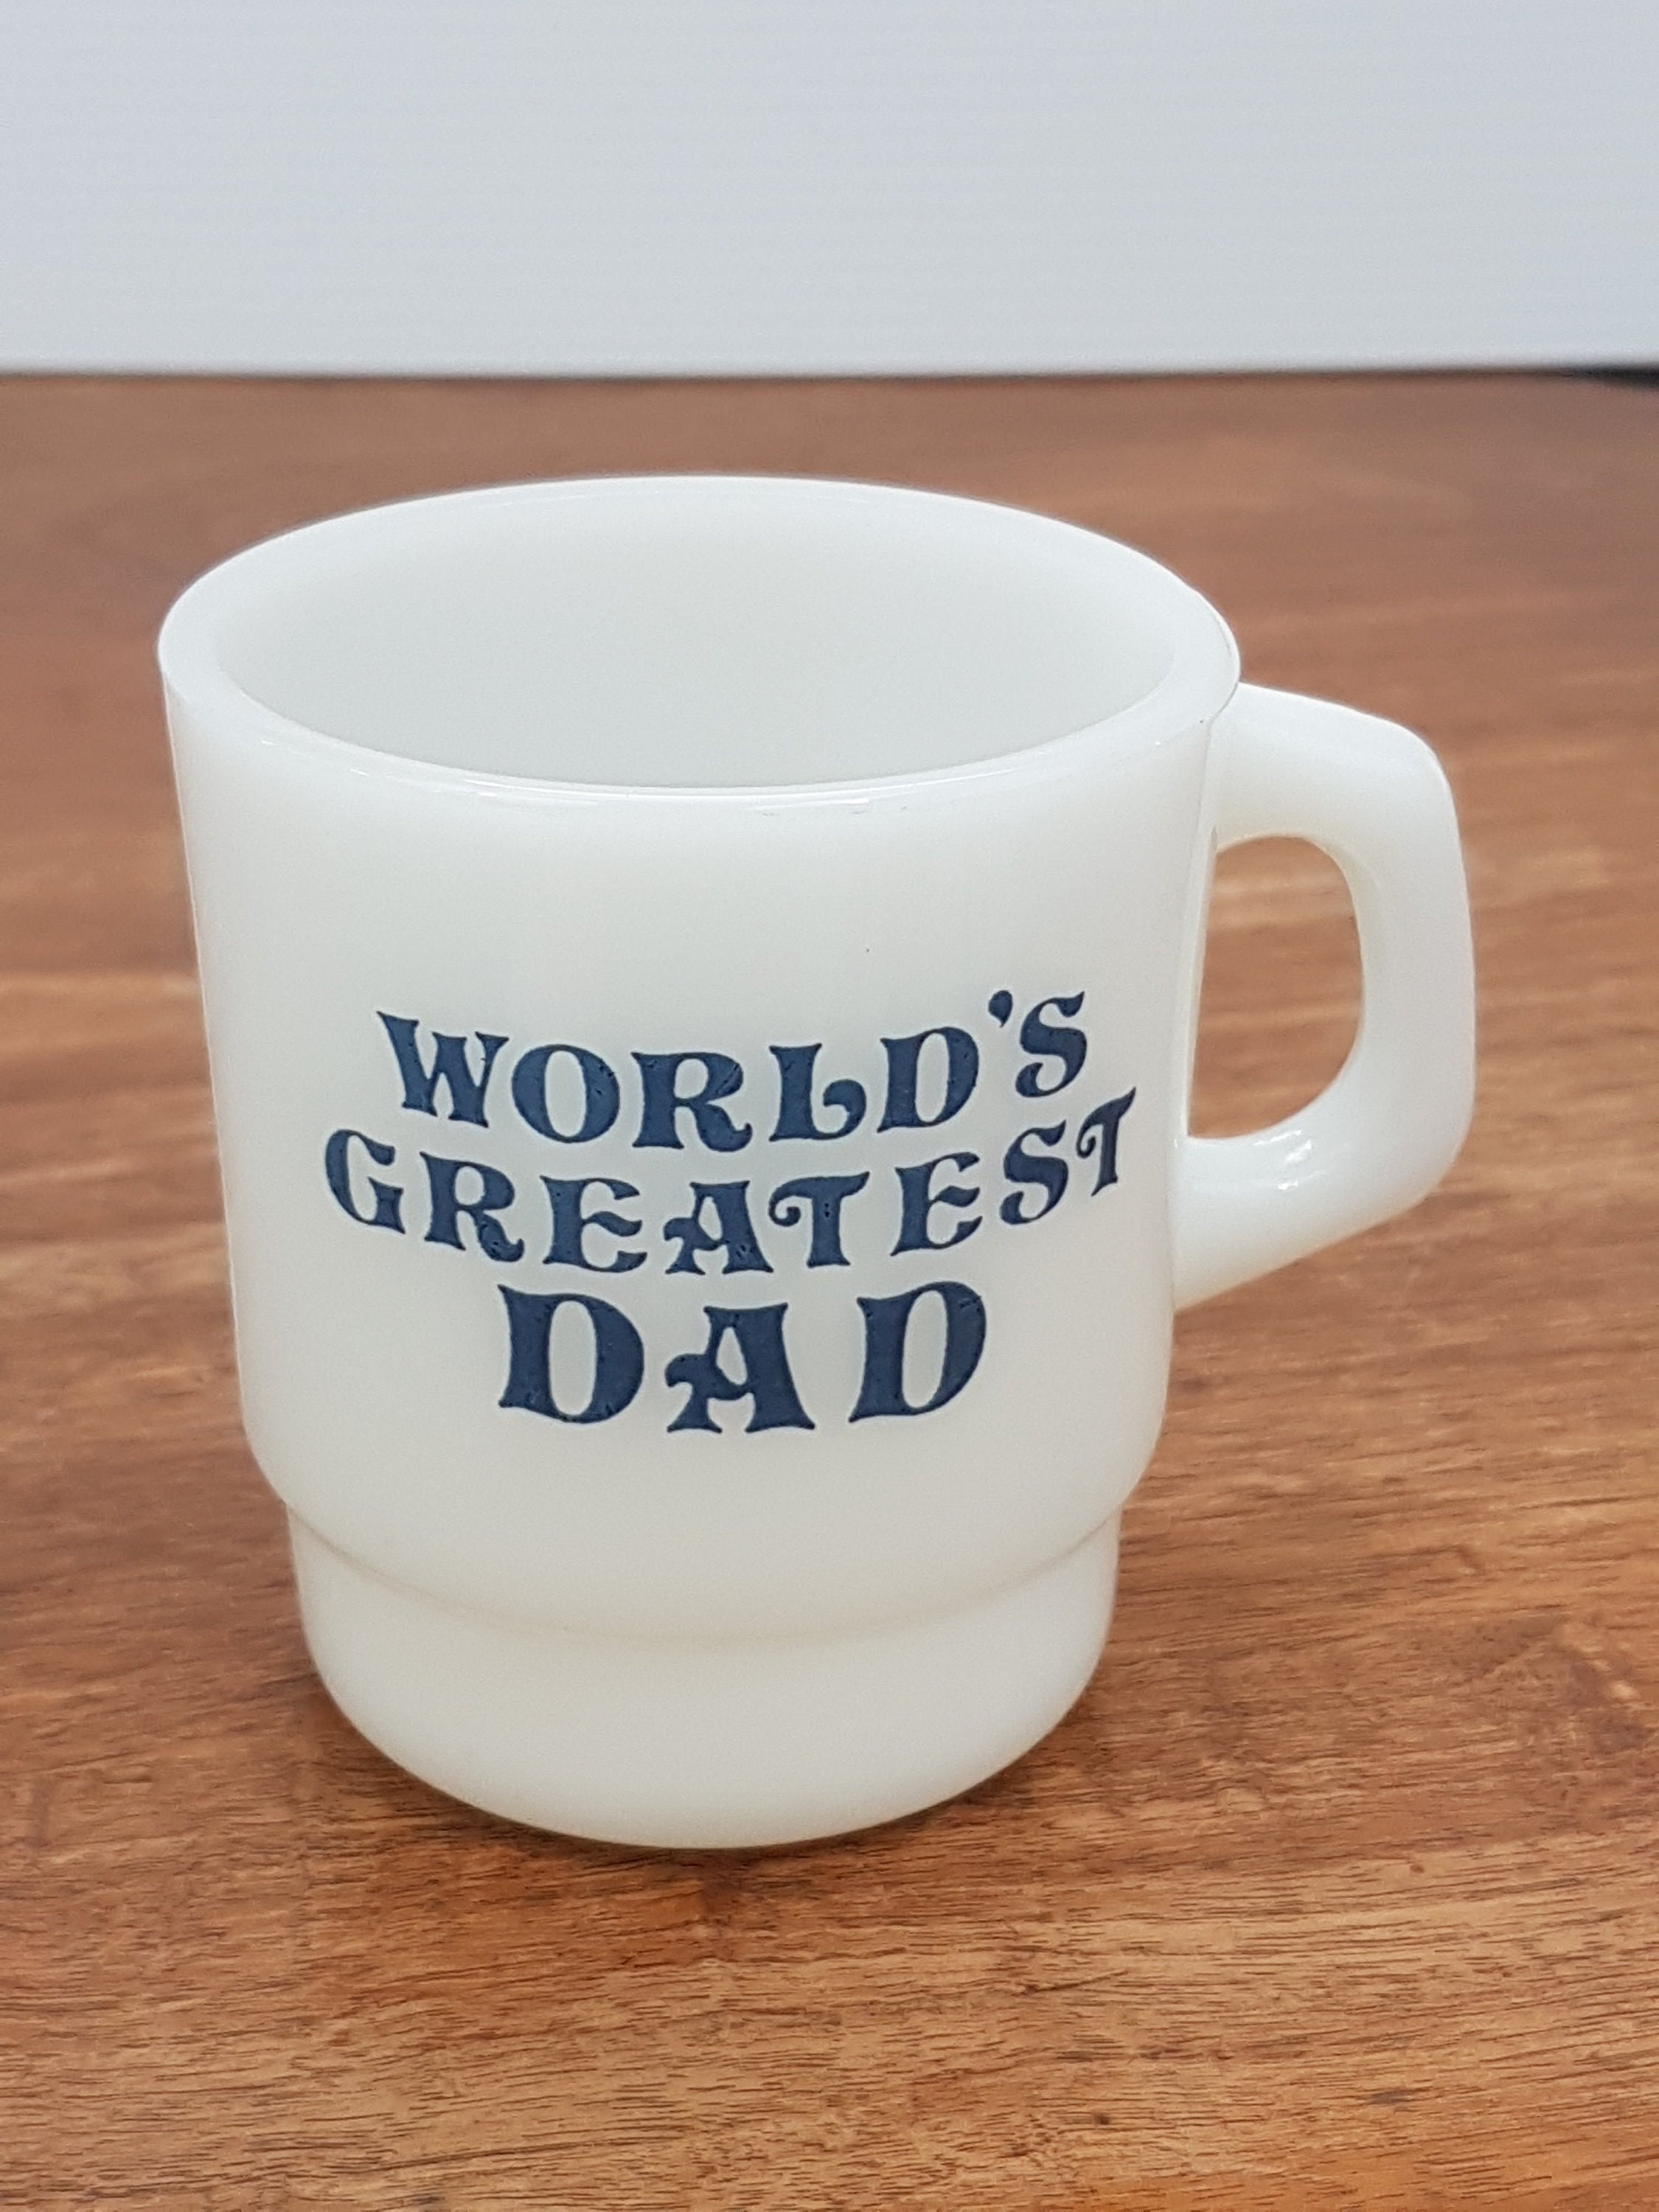 Vtg New Father Mug the World According to a New 